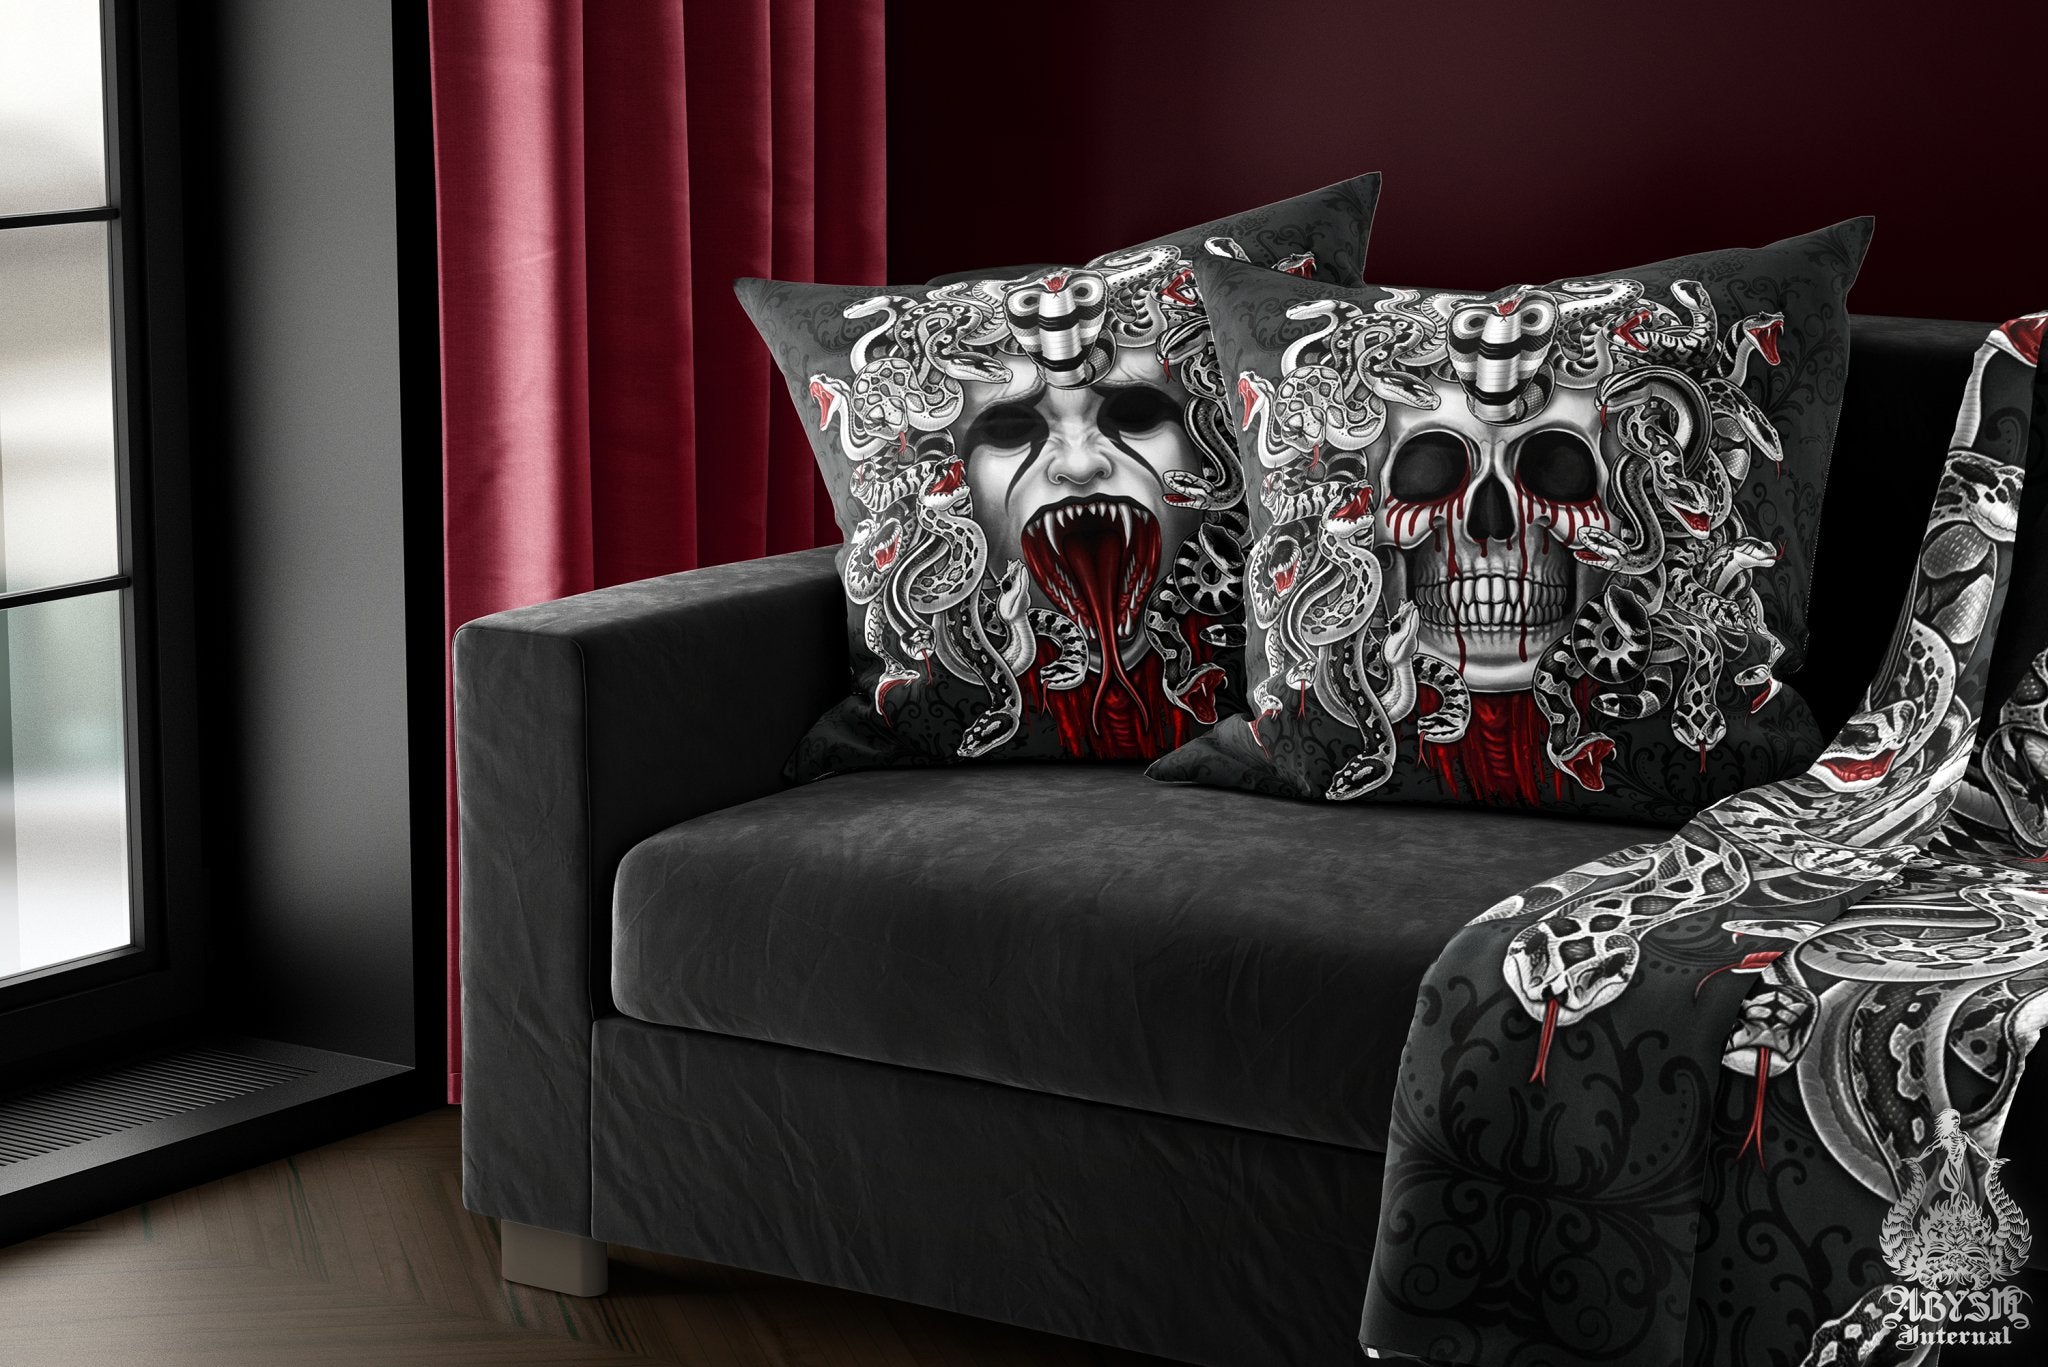 Skull Throw Pillow, Decorative Accent Pillow, Square Cushion Cover, Medusa, Nu Goth Black Room Decor, Macabre Art, Alternative Home - Gothic, 2 Faces, 3 Colors - Abysm Internal